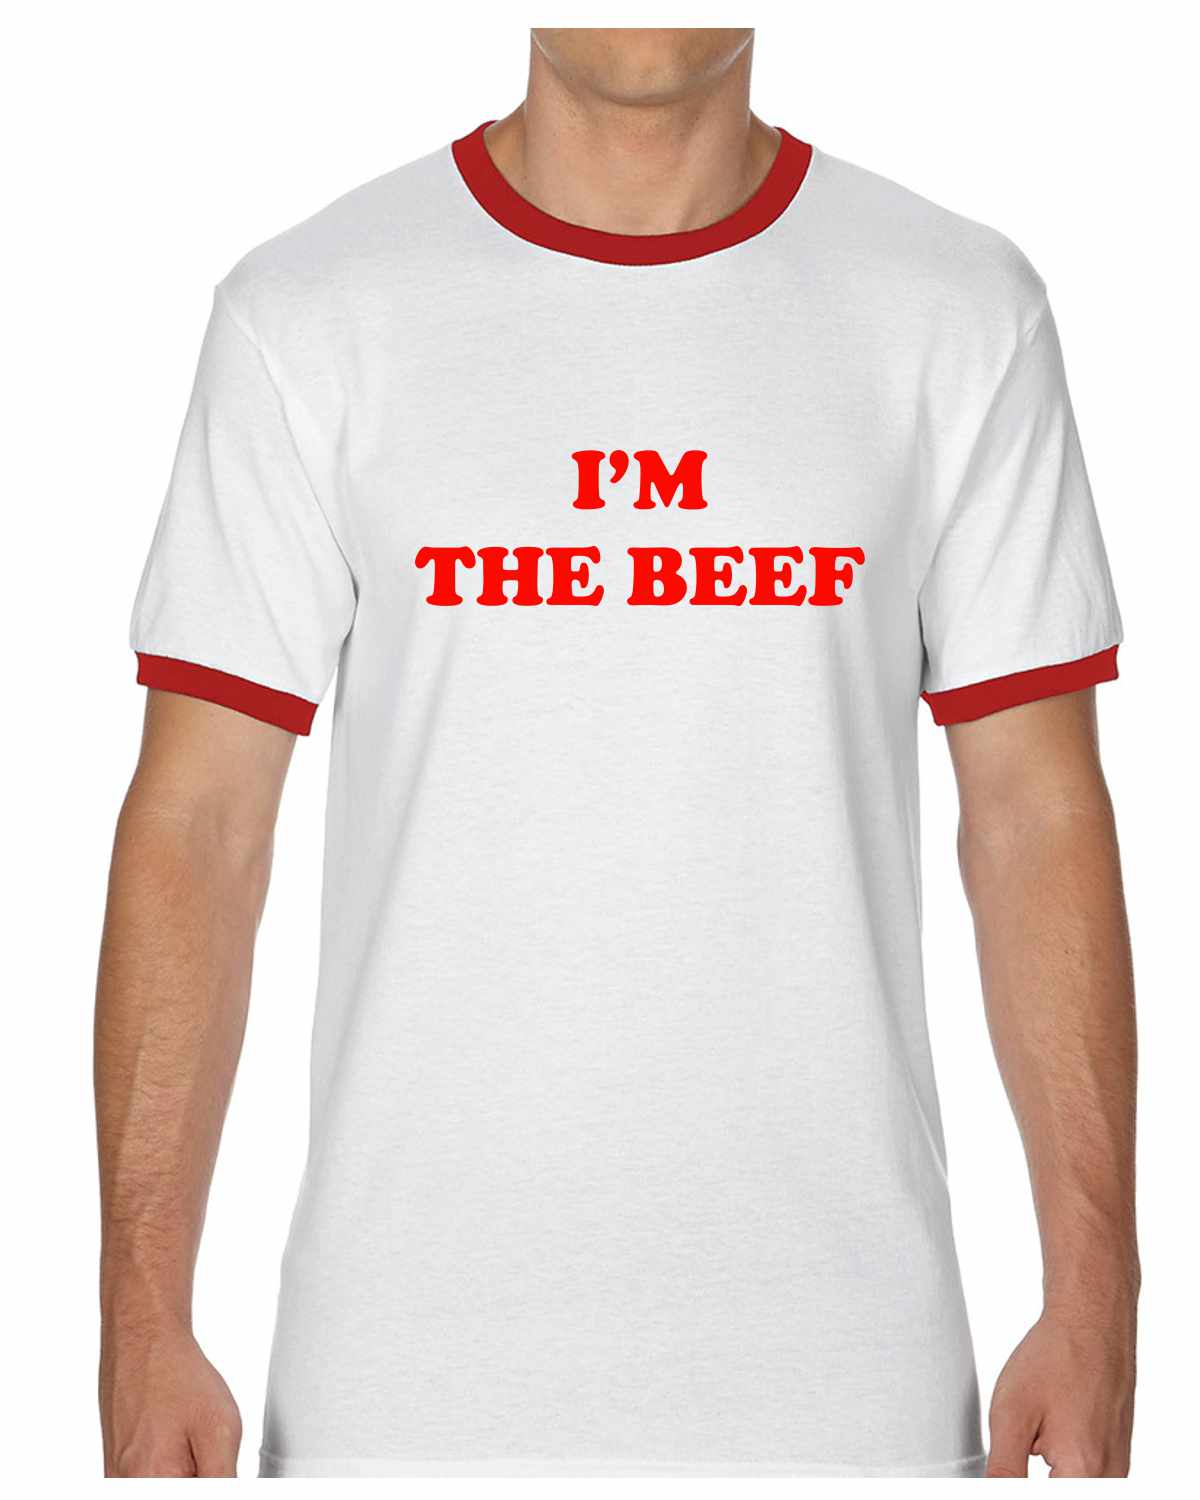 I'm The Beef Ringer Tee